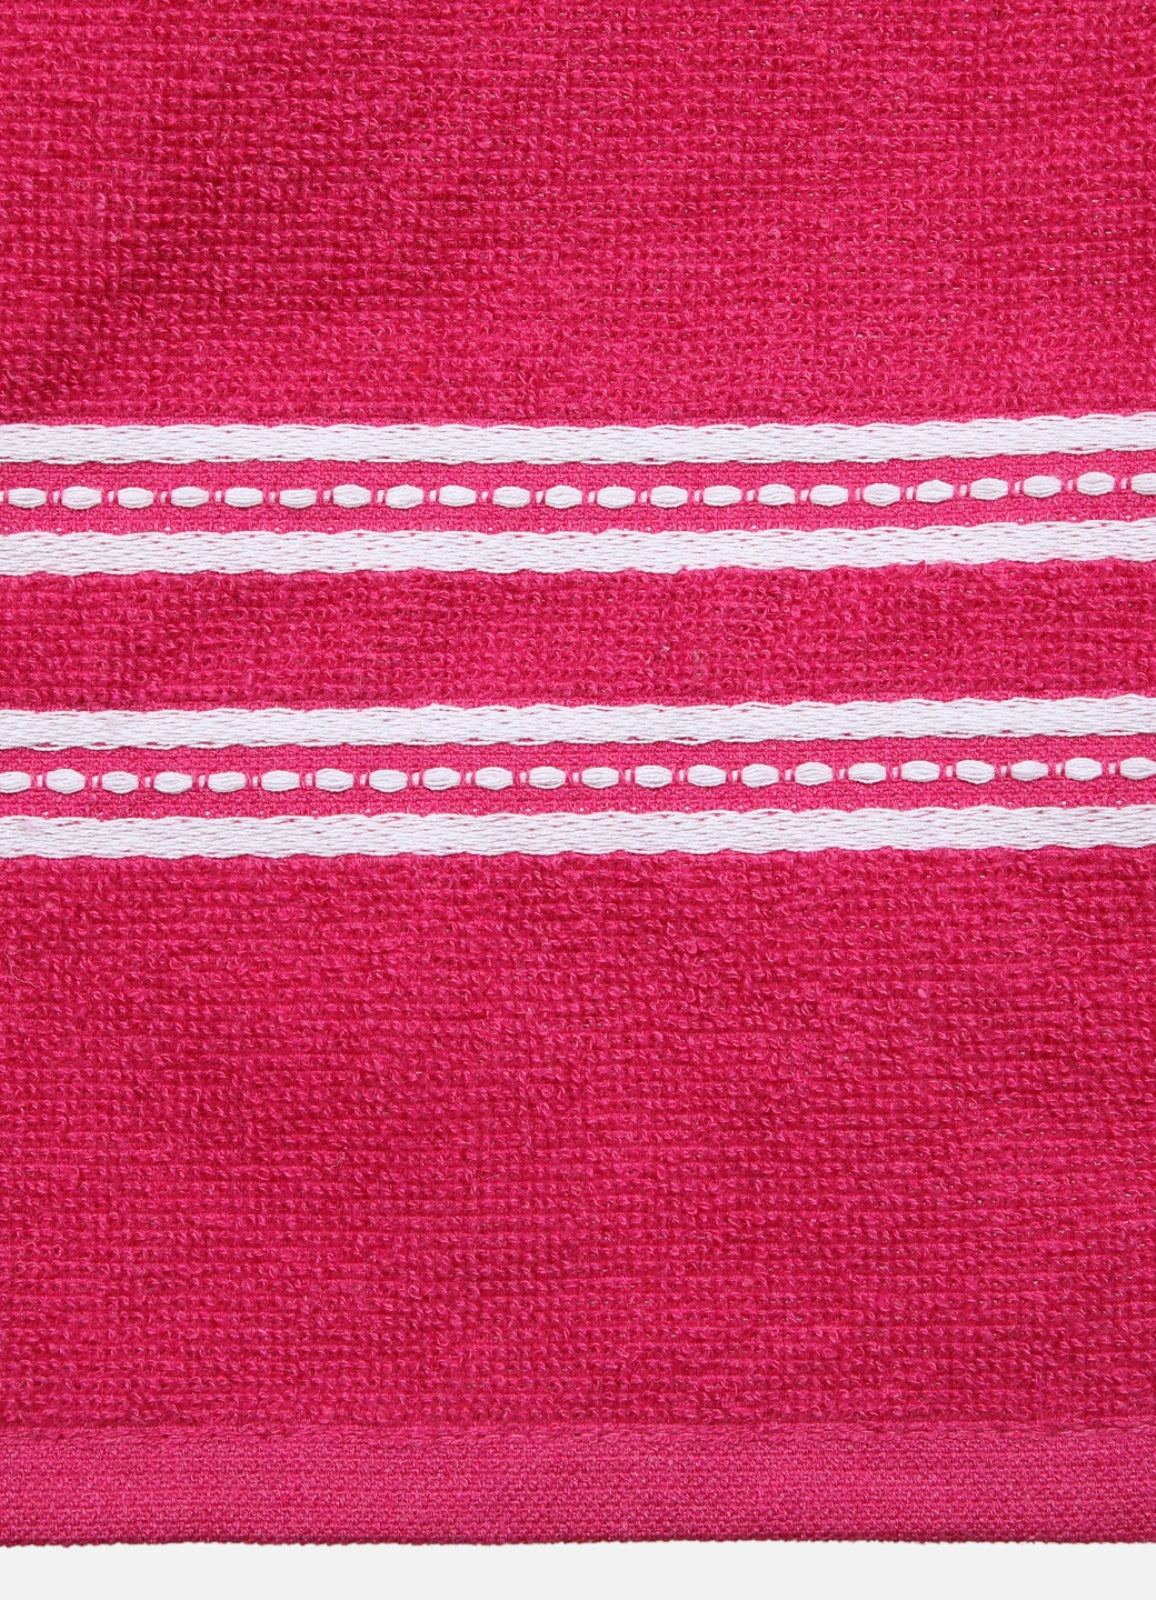 Set of 2 Pink Solid Cotton Towels